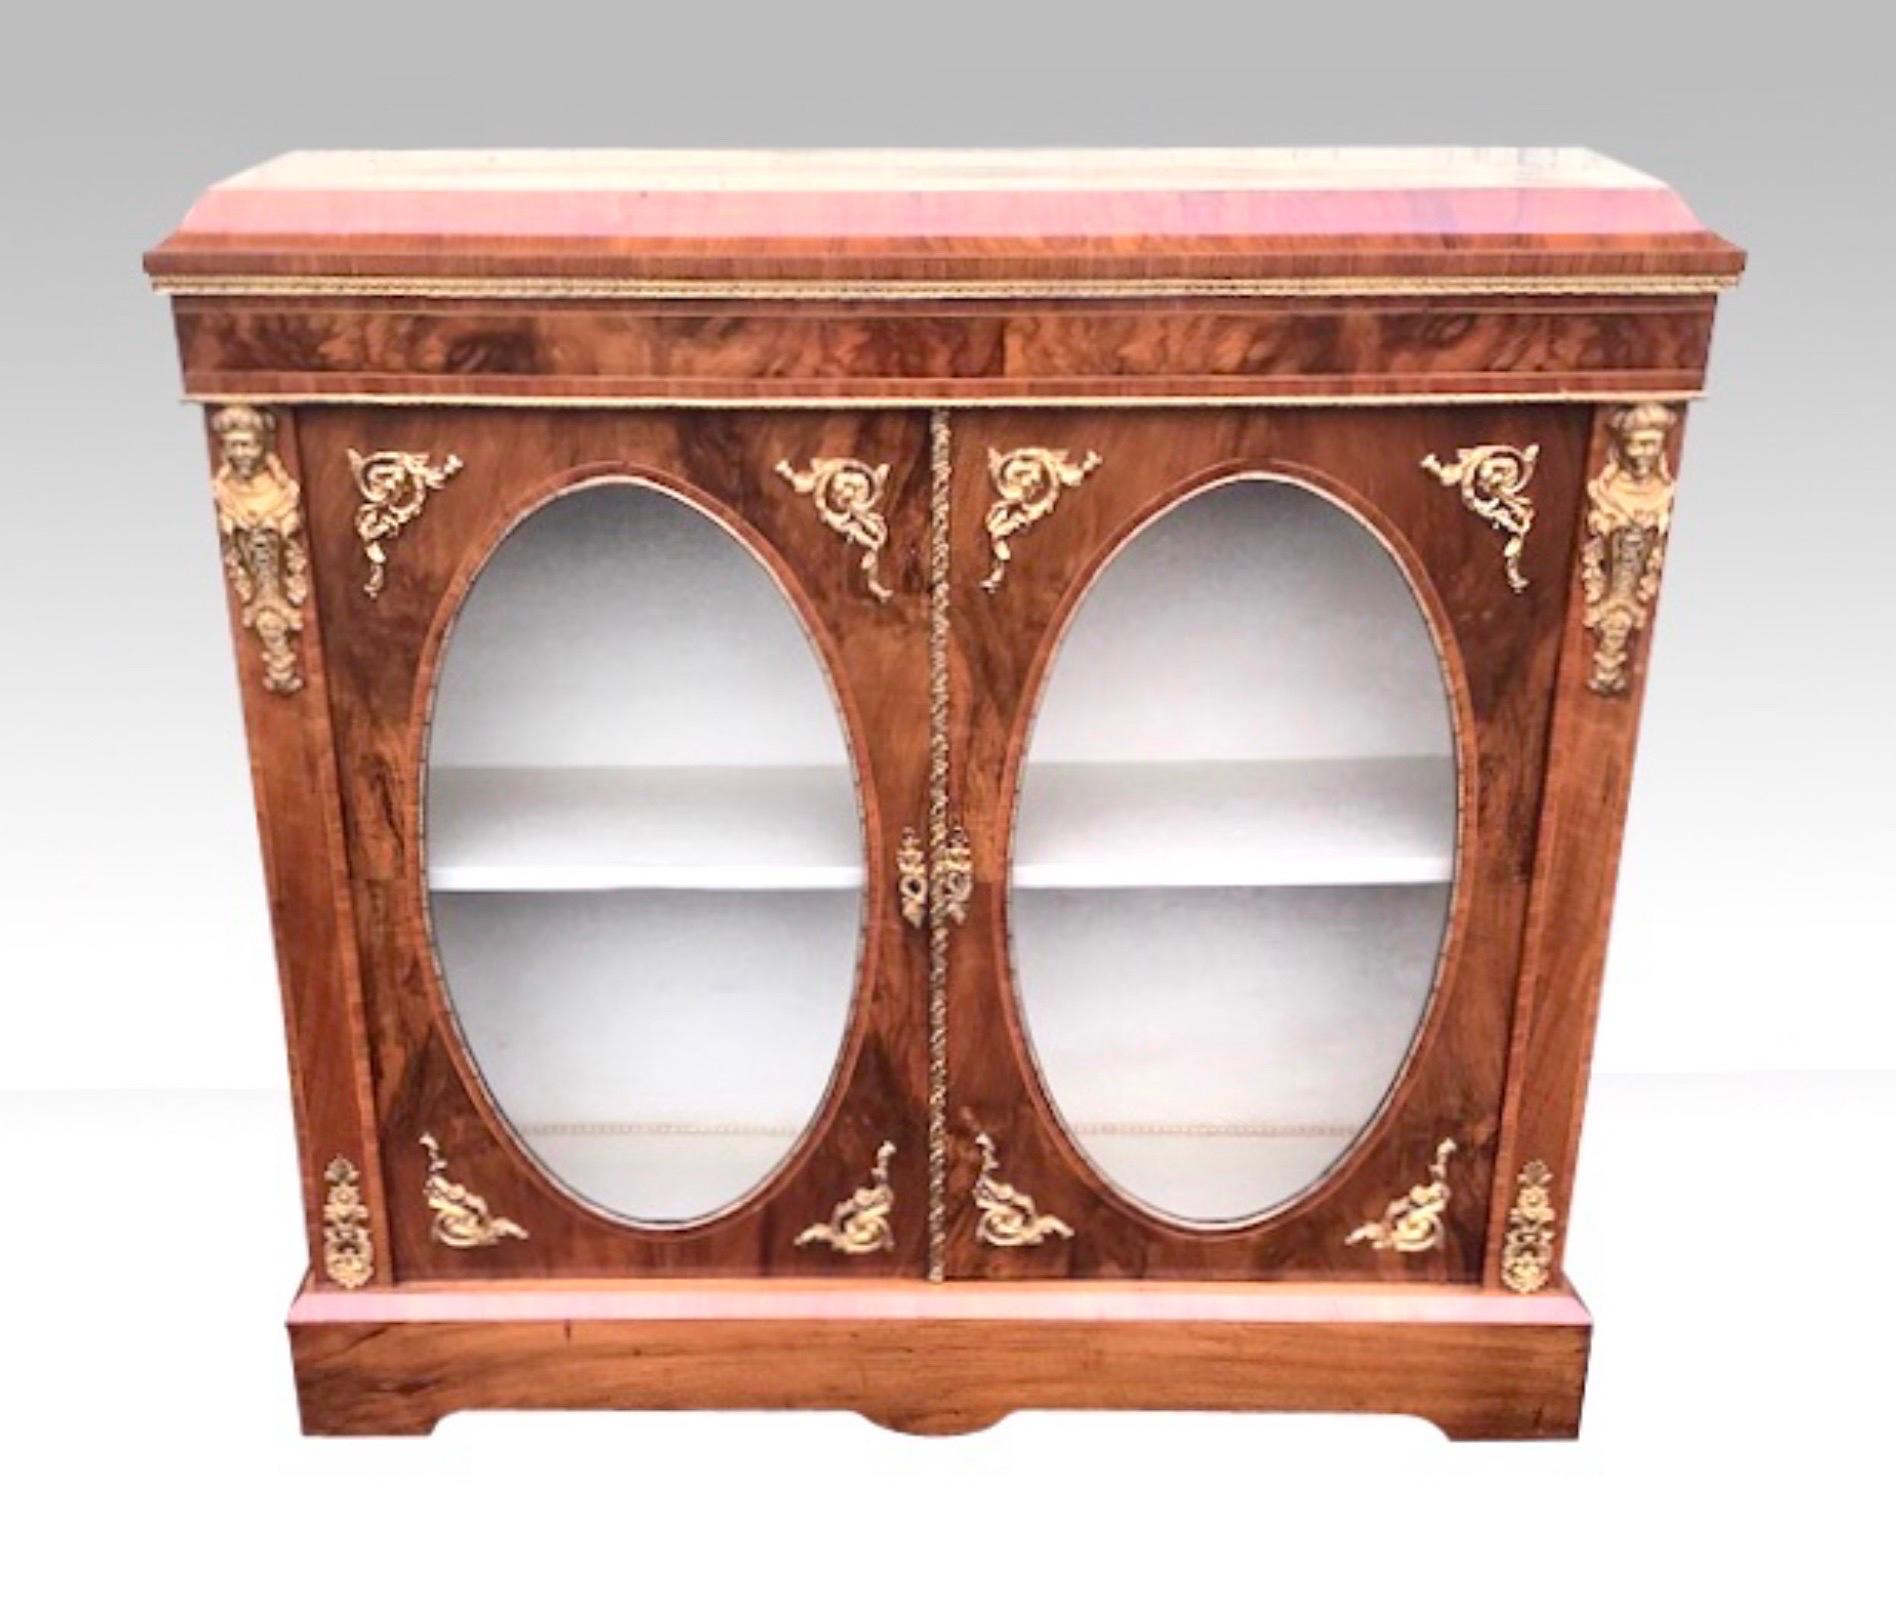 Figured Inlaid Walnut Ormolu Mounted Two Doored Antique Victorian Pier Cabinet For Sale 4